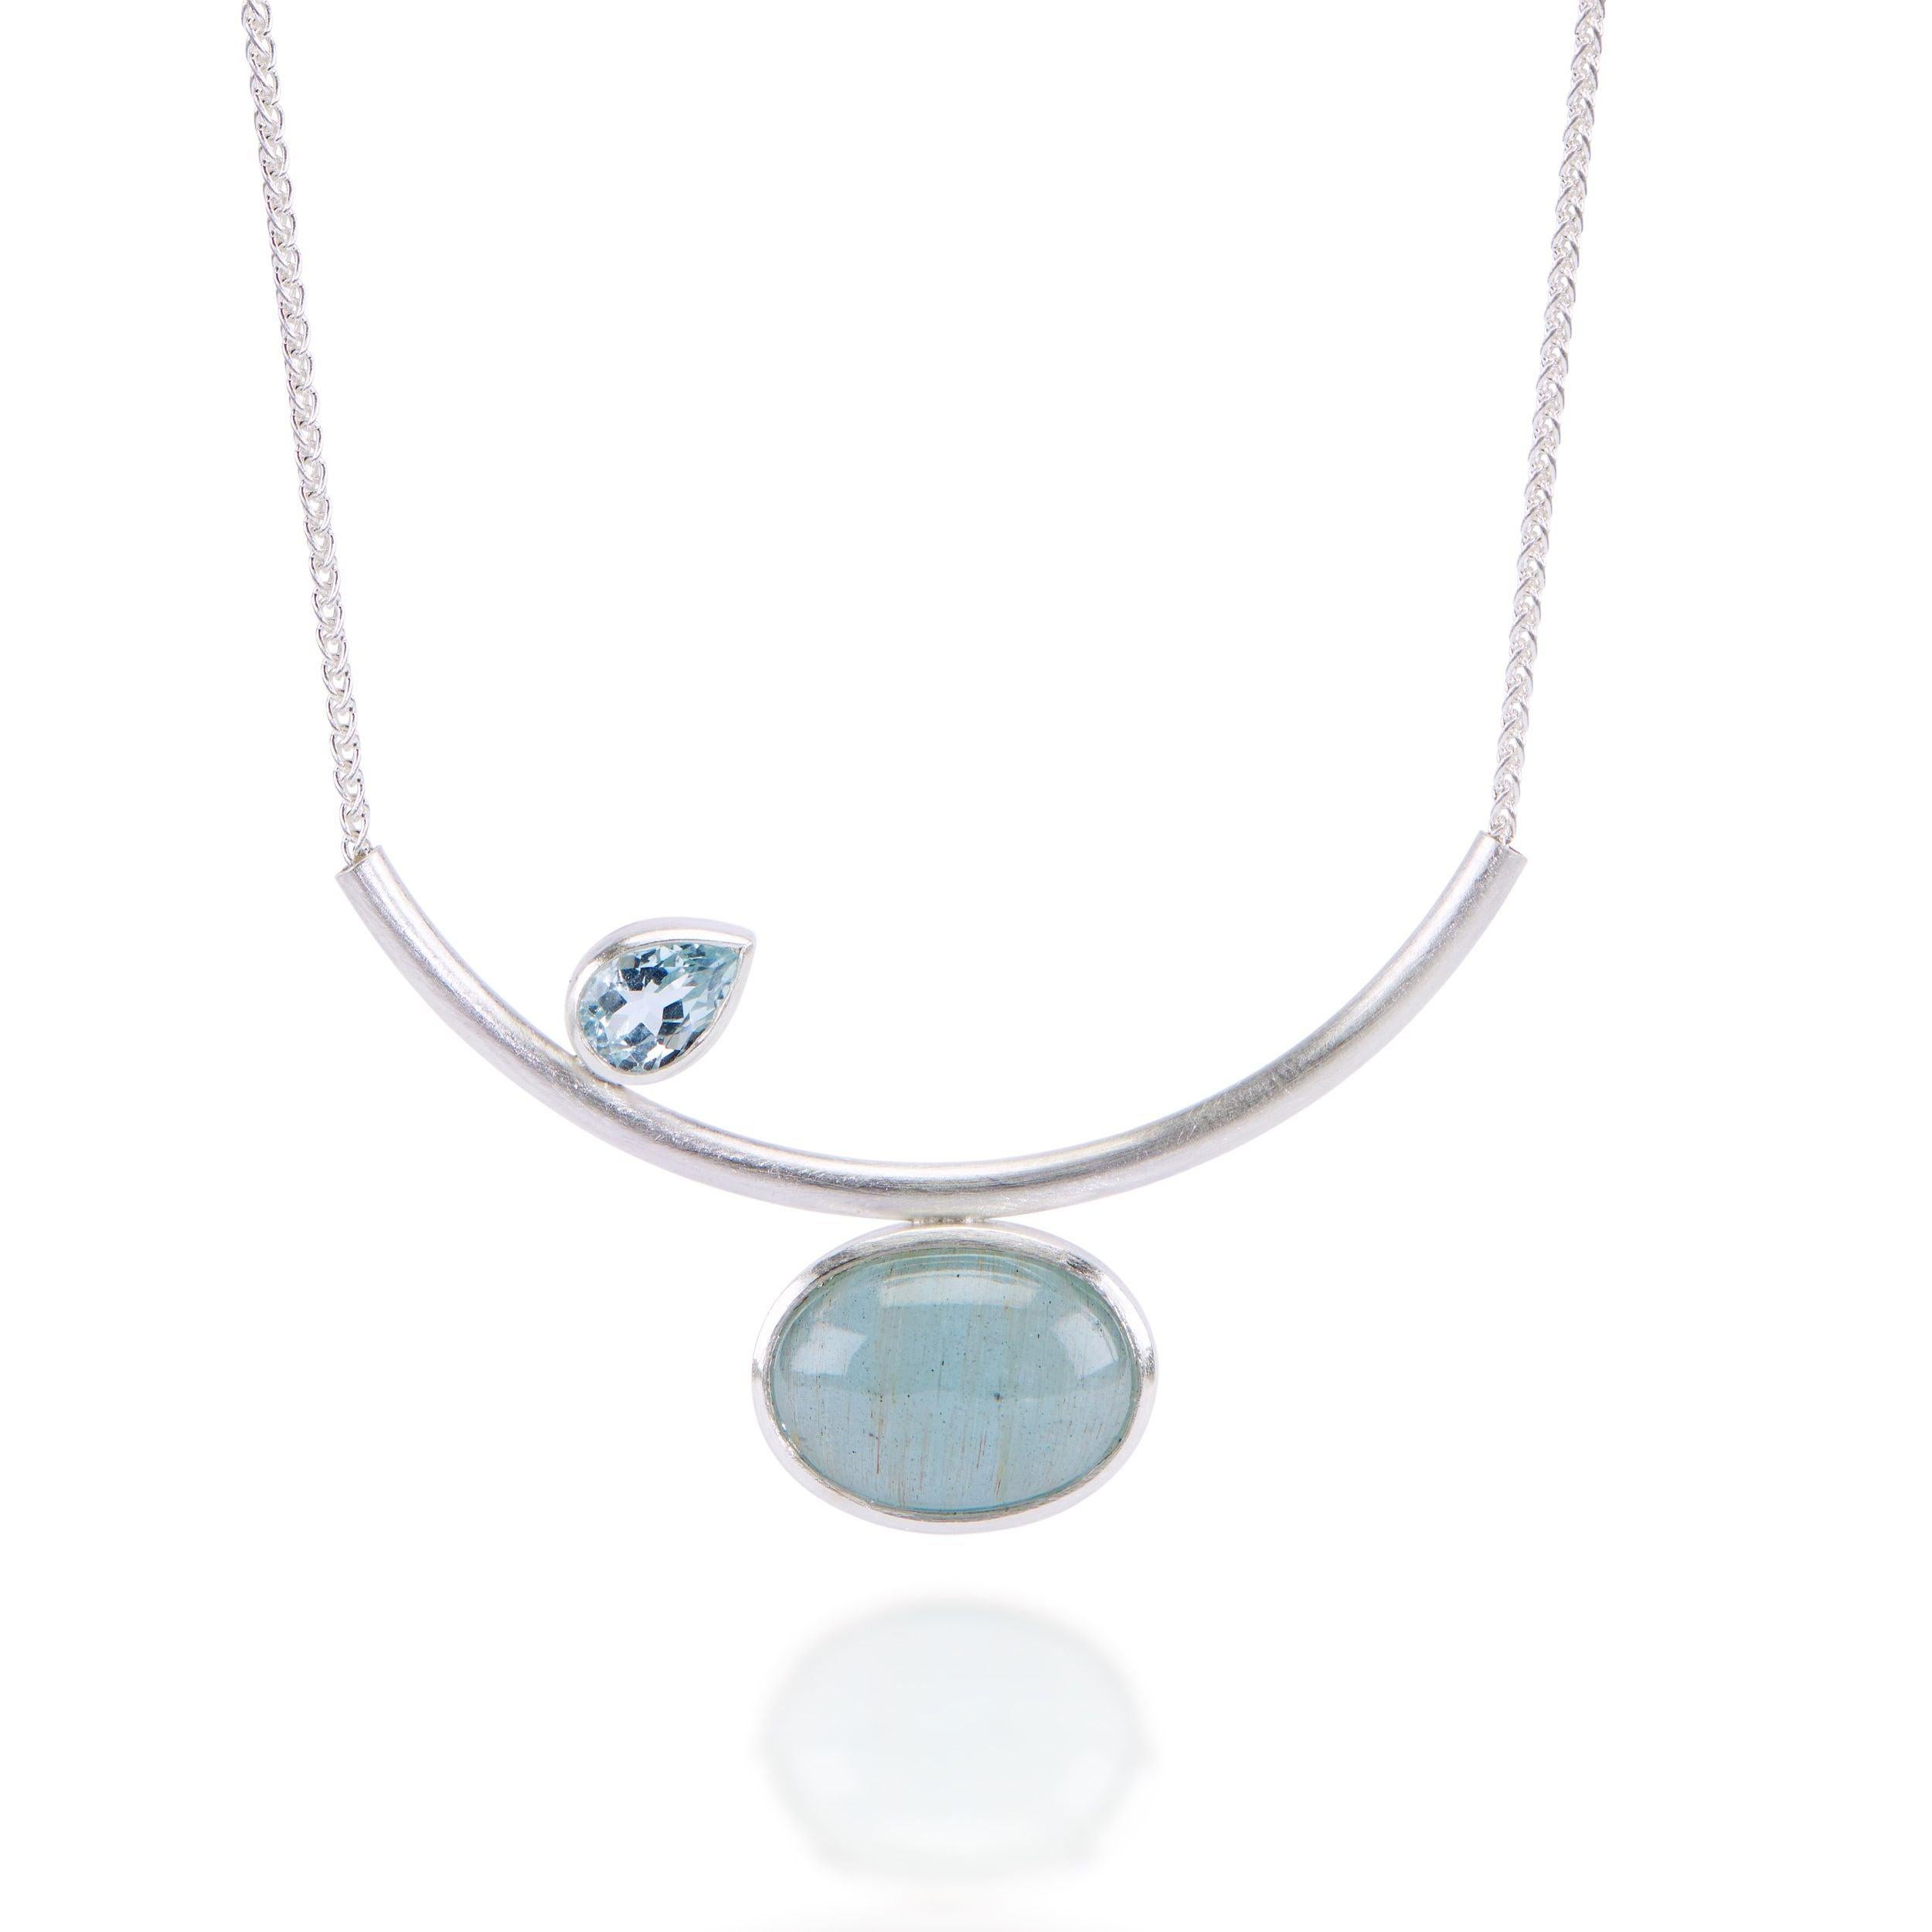 This very contemporary aquamarine and sterling silver 16.5